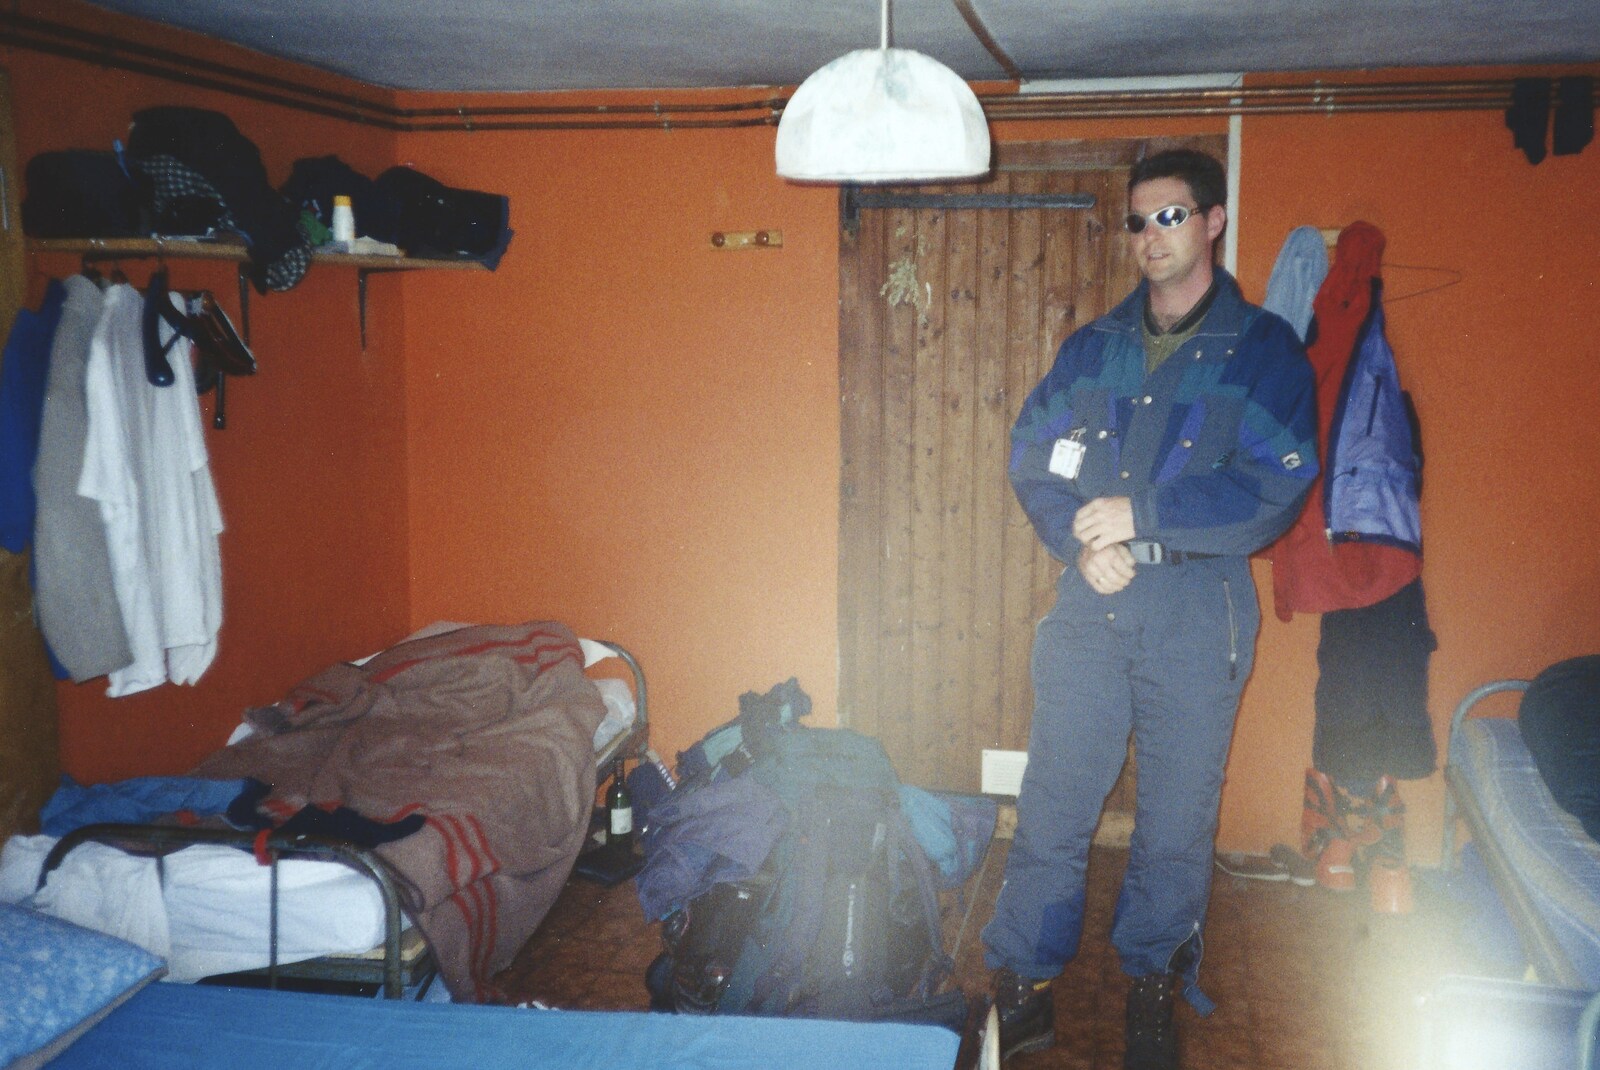 Skiing With Sean, Chamonix, Haute-Savoie, France - 15th March 1999: Sean is geared up in the dormitory room we're in